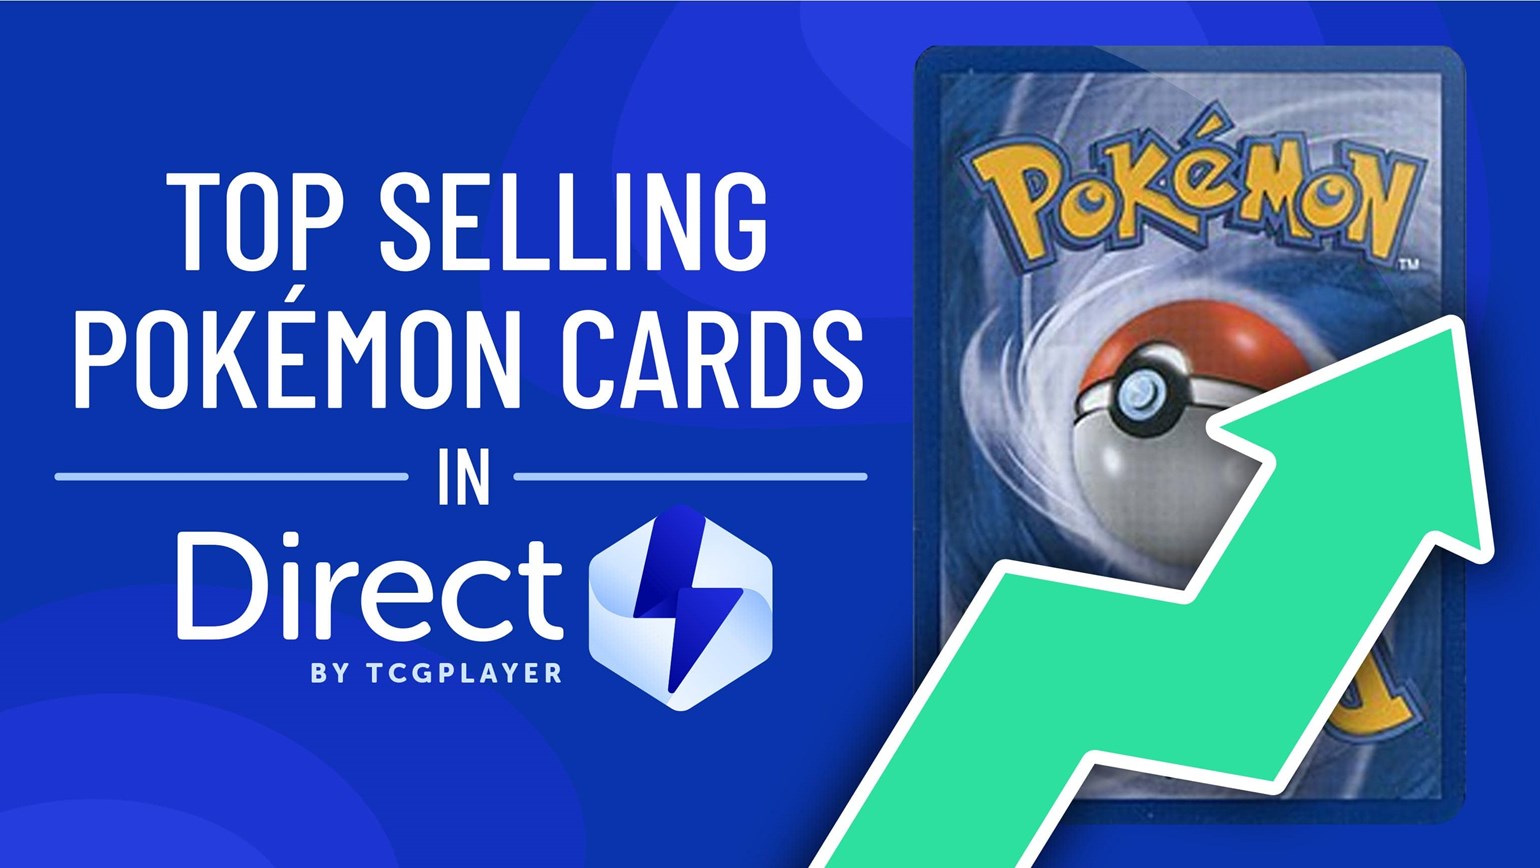 October Top Selling Pokémon Cards Under $25 in Direct by TCGplayer